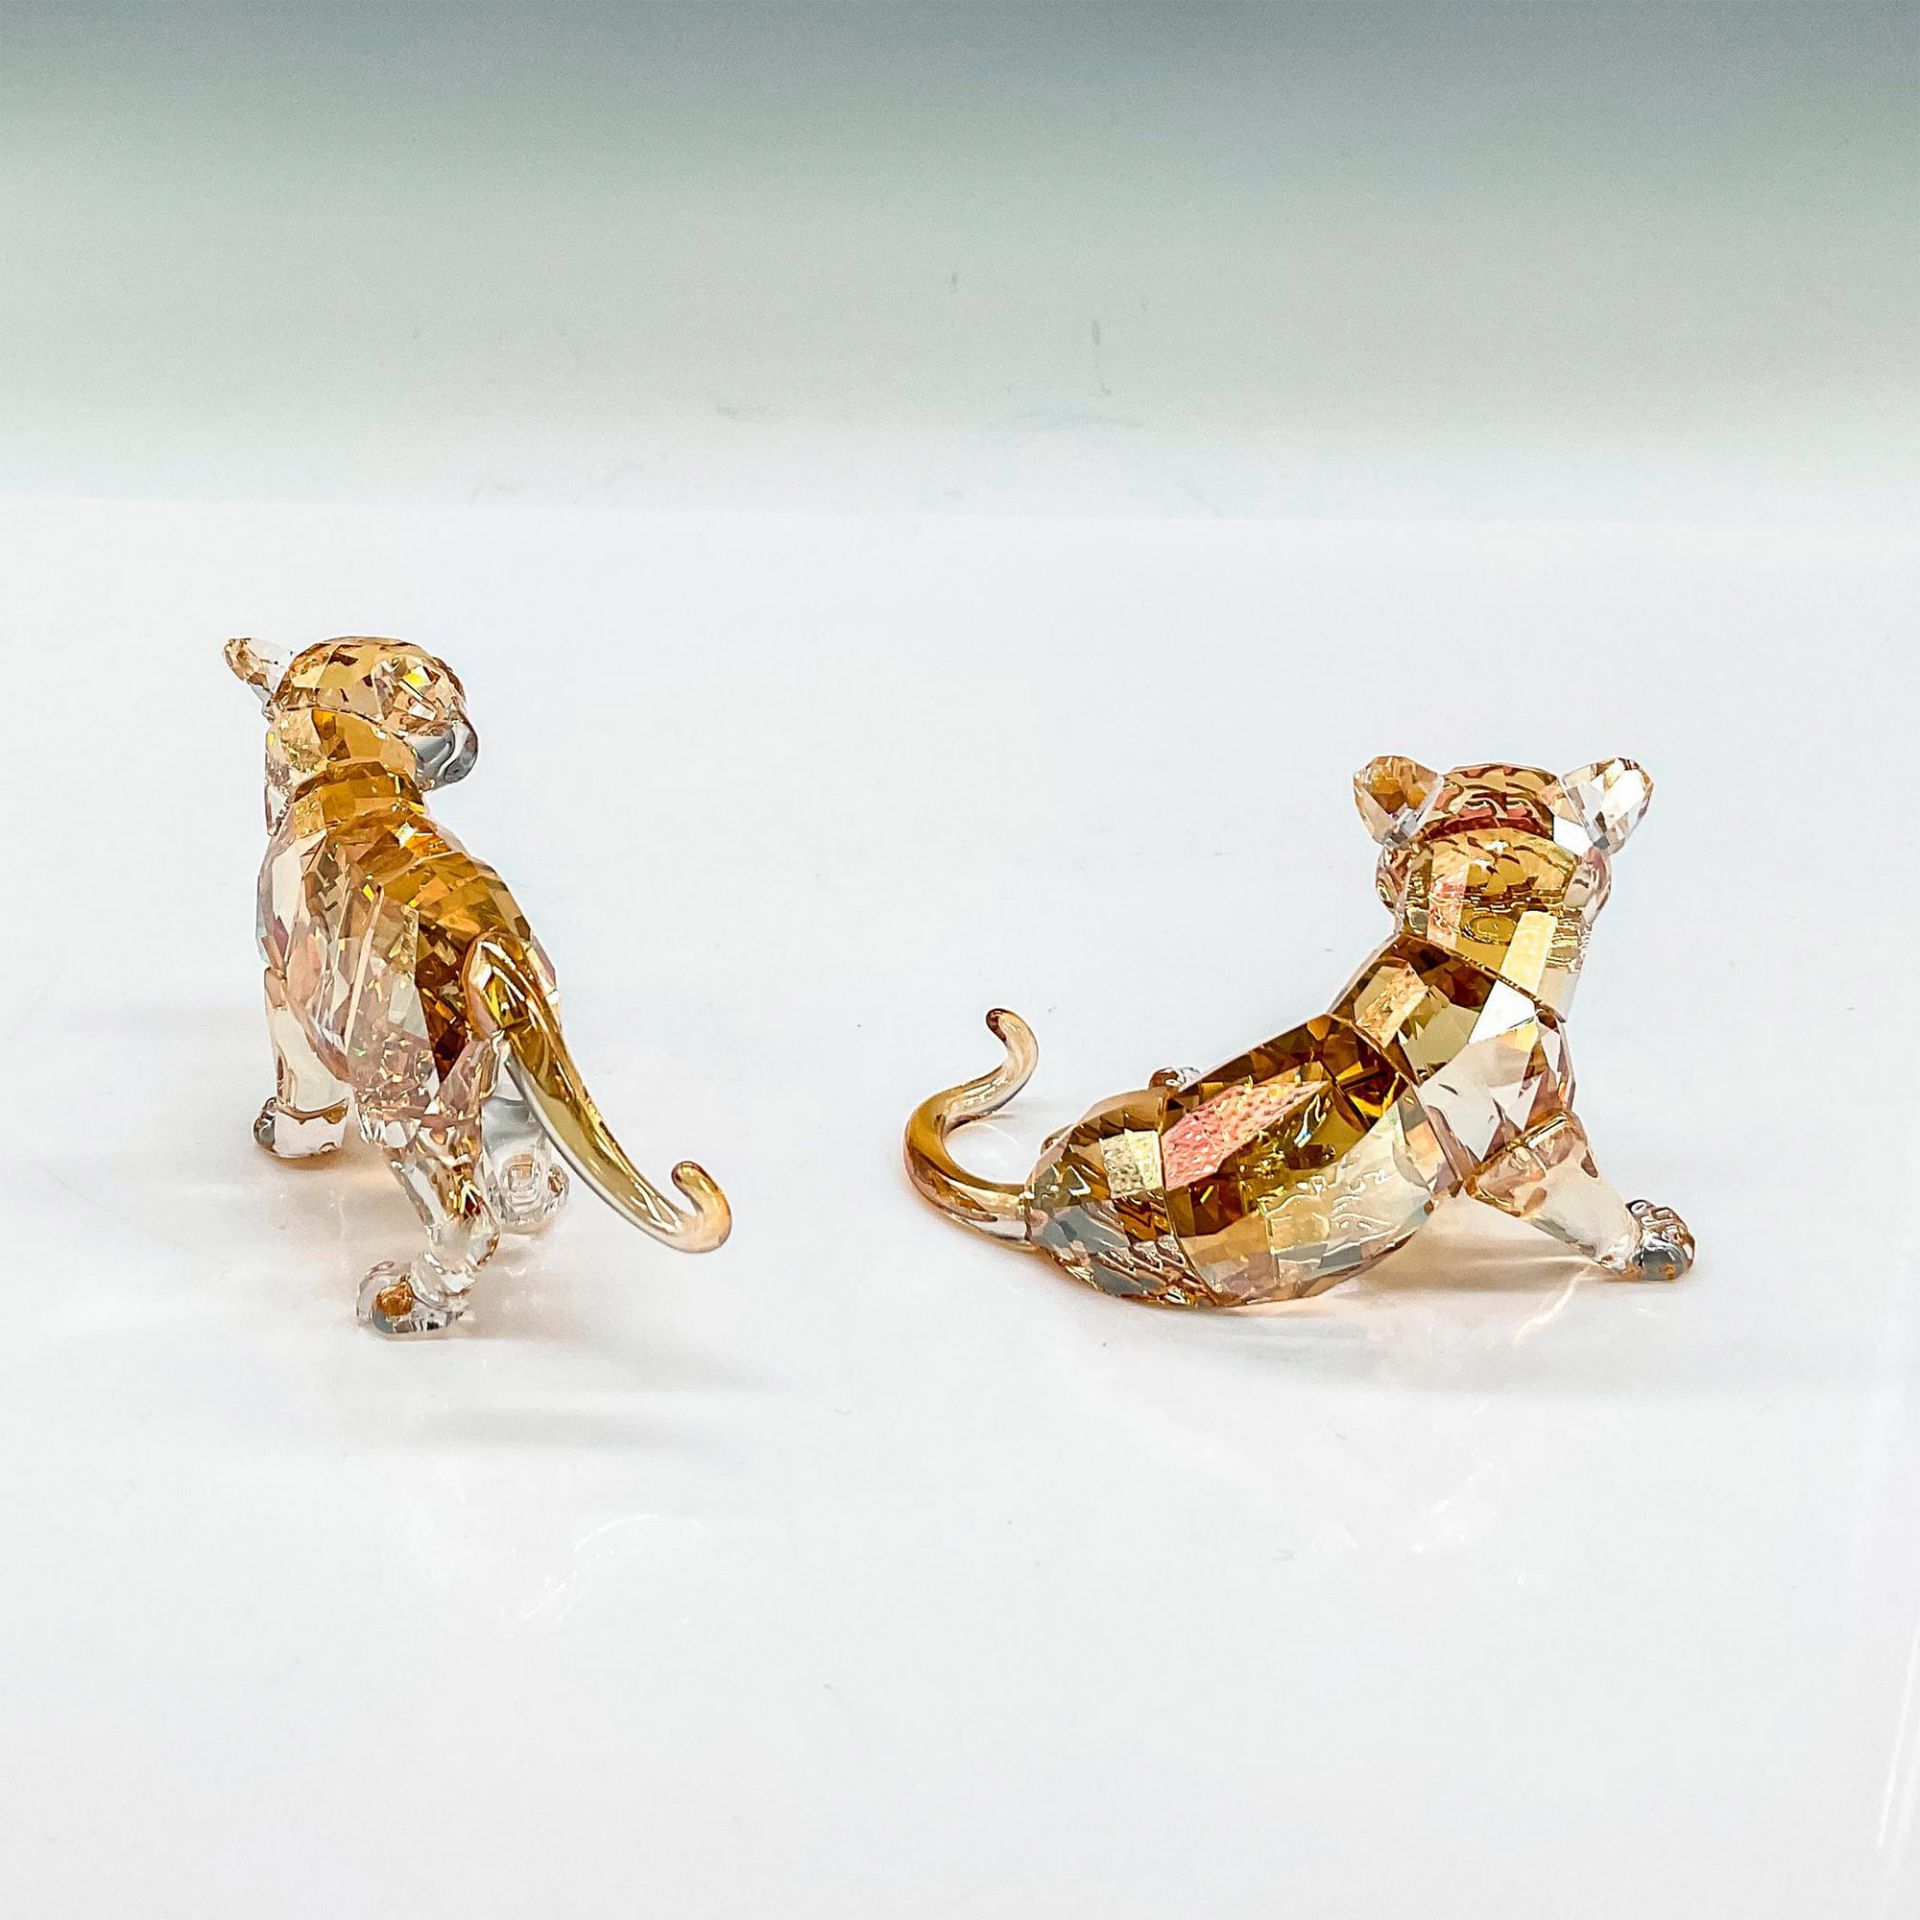 3pc Swarovski Crystal Figurines, Tiger and Cubs - Image 6 of 8